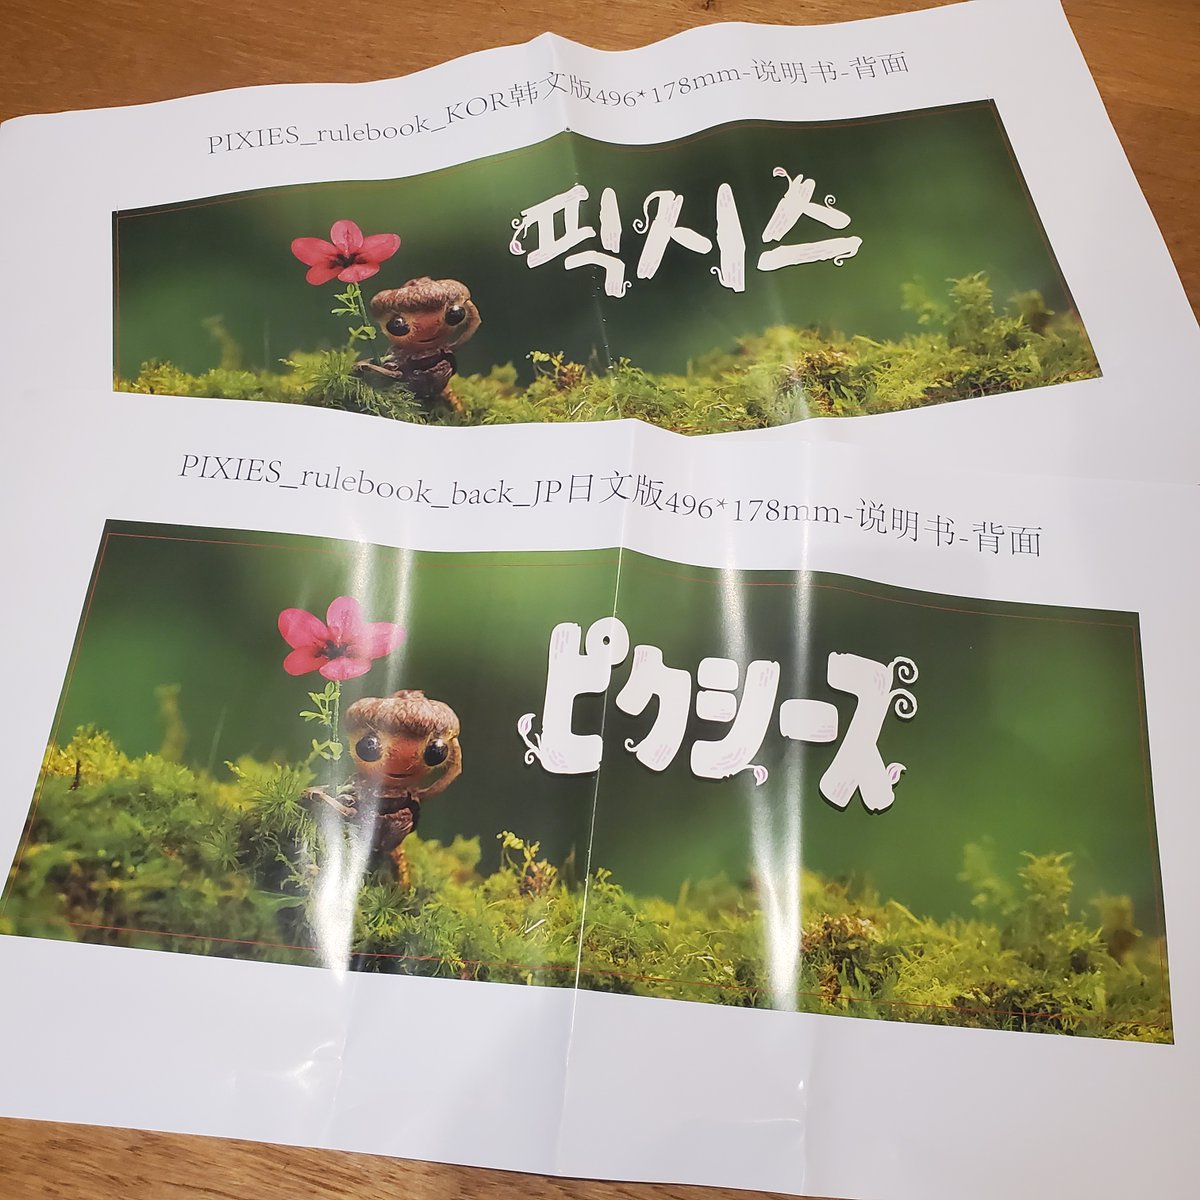 Nature's little creatures have decided to travel to Asia in the coming weeks!
@JohannesGoupy has even promised to explain Pixies in local languages!
(that's only some of what we received in today's mail... more tomorrow)
#Pixies_Bombyx @PS_hobbyjapan